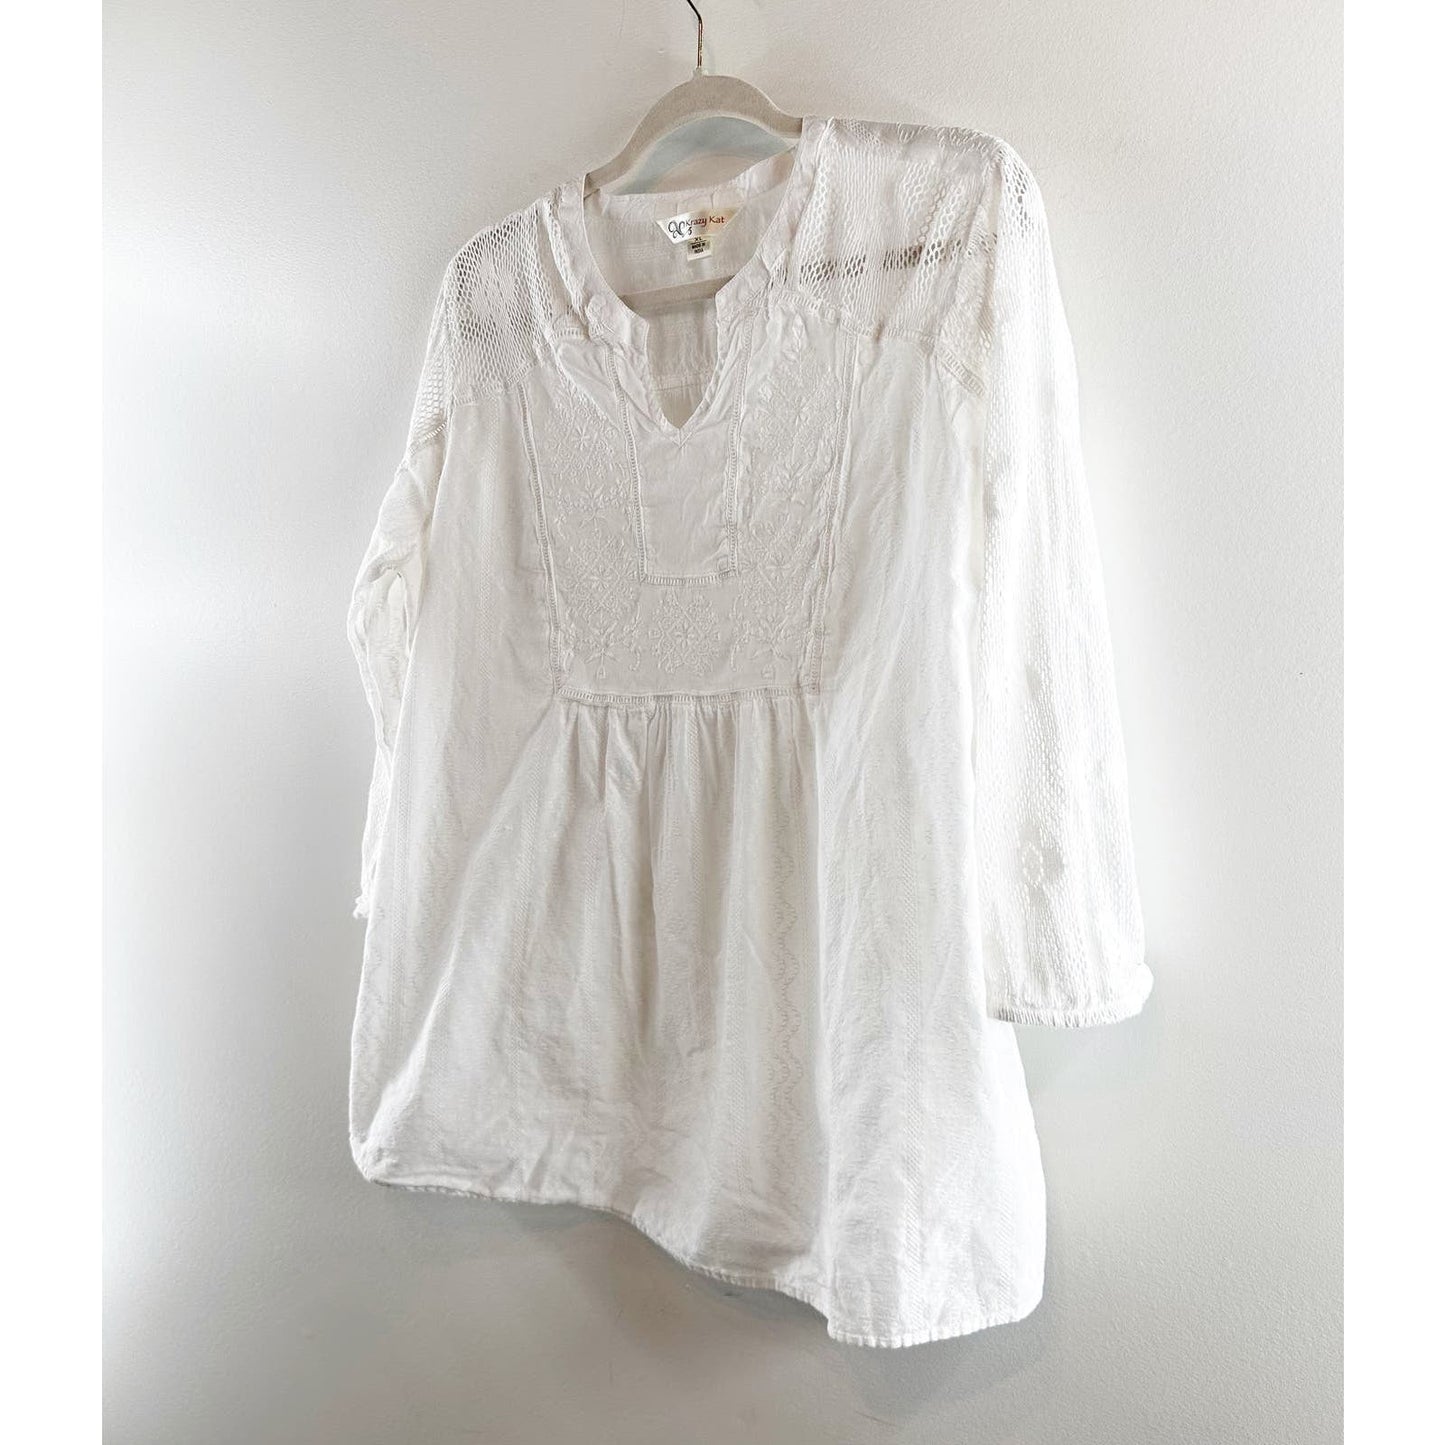 Krazy Kat Embroidered Lace Crochet Sleeve Boho Cotton Tunic Top Blouse White XL